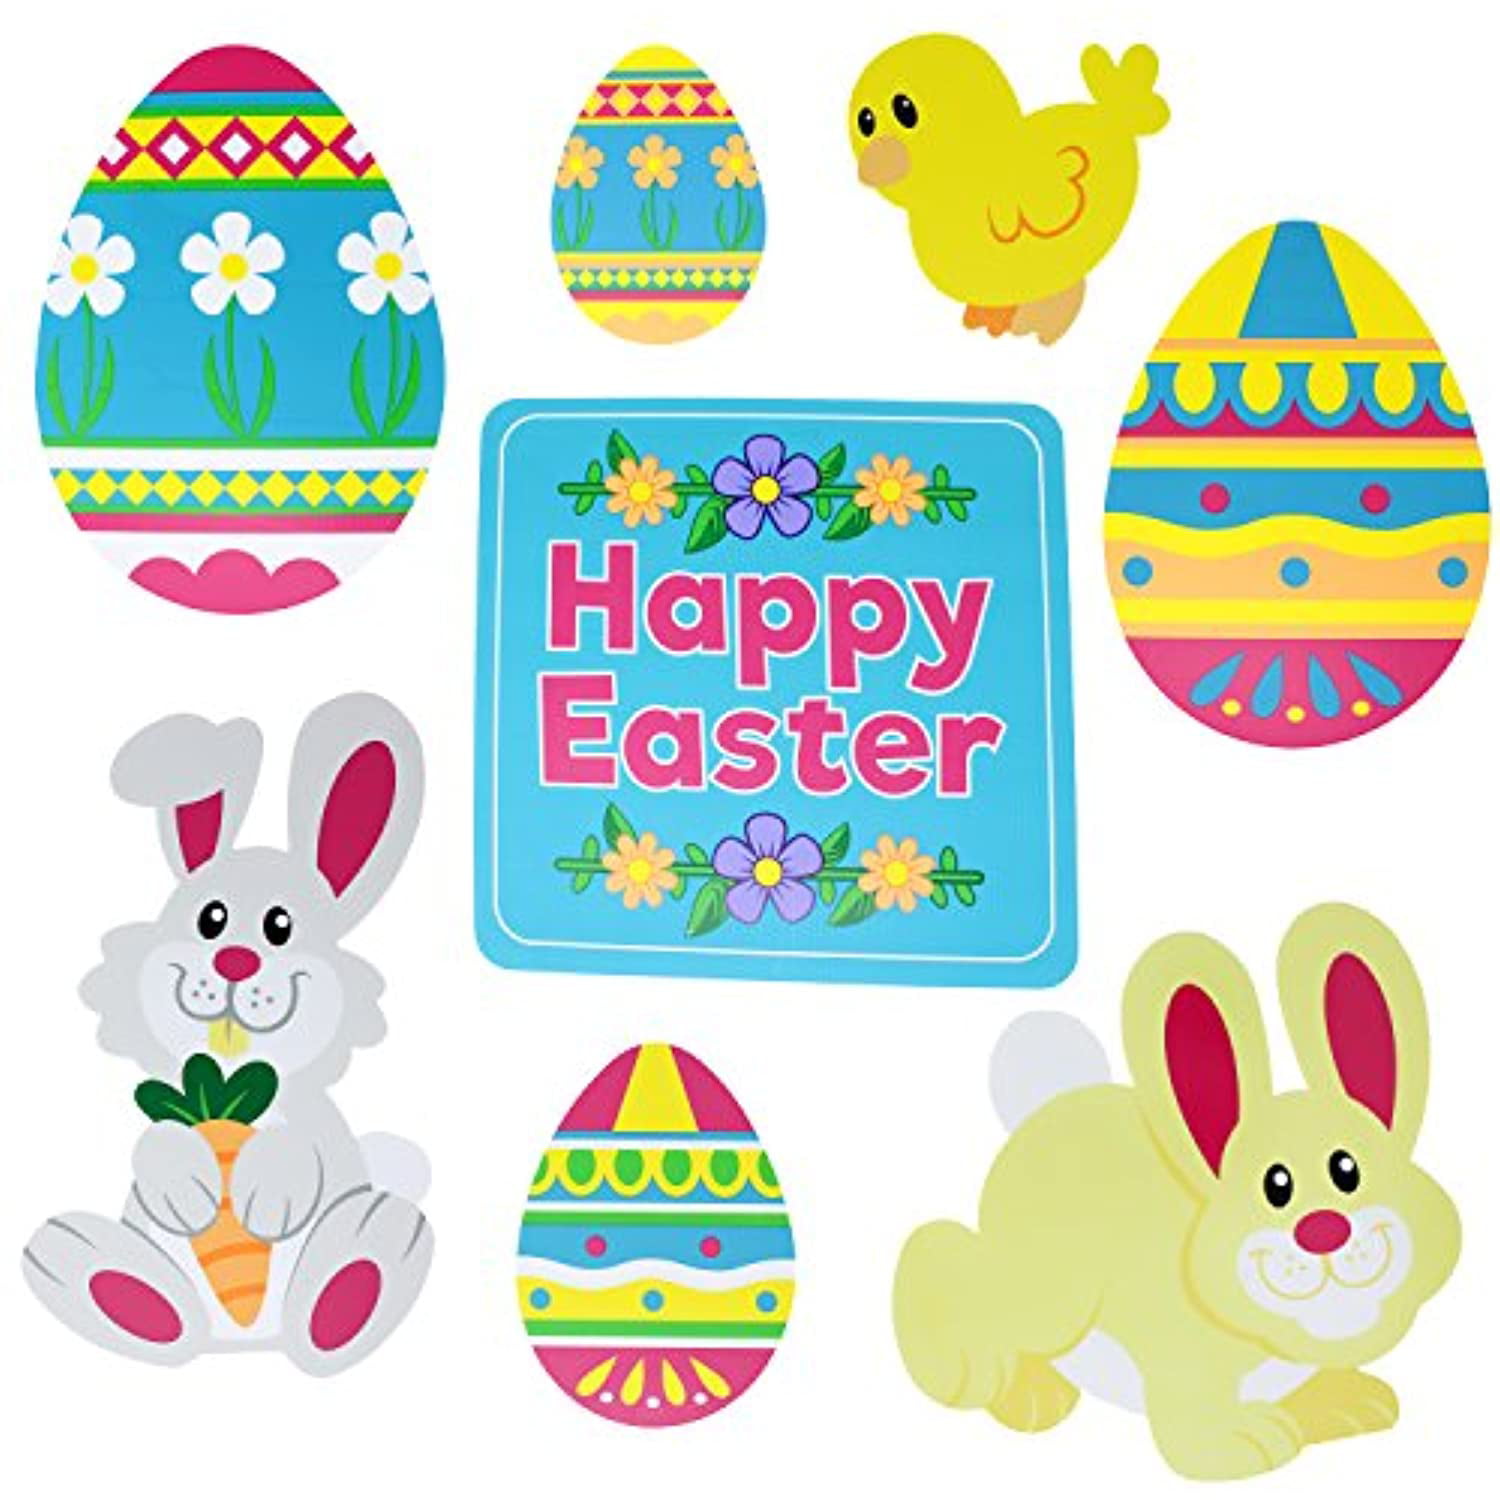 8 Pieces Easter Yard Signs Decorations Outdoor Bunny Chick and Eggs Yard Stake Signs Easter Lawn Yard Decorations for Easter Hunt Game,